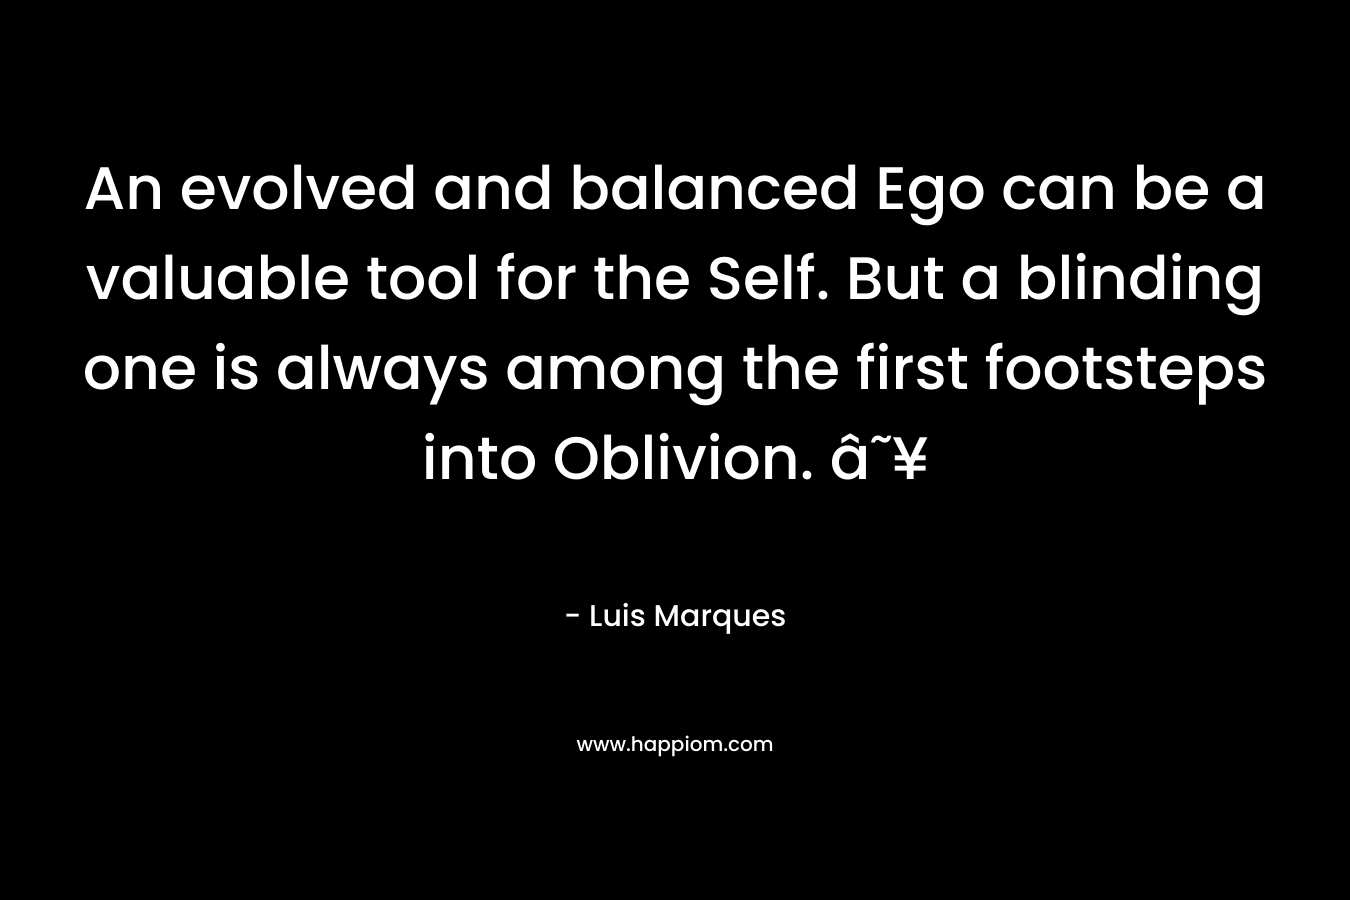 An evolved and balanced Ego can be a valuable tool for the Self. But a blinding one is always among the first footsteps into Oblivion. â˜¥ – Luis Marques